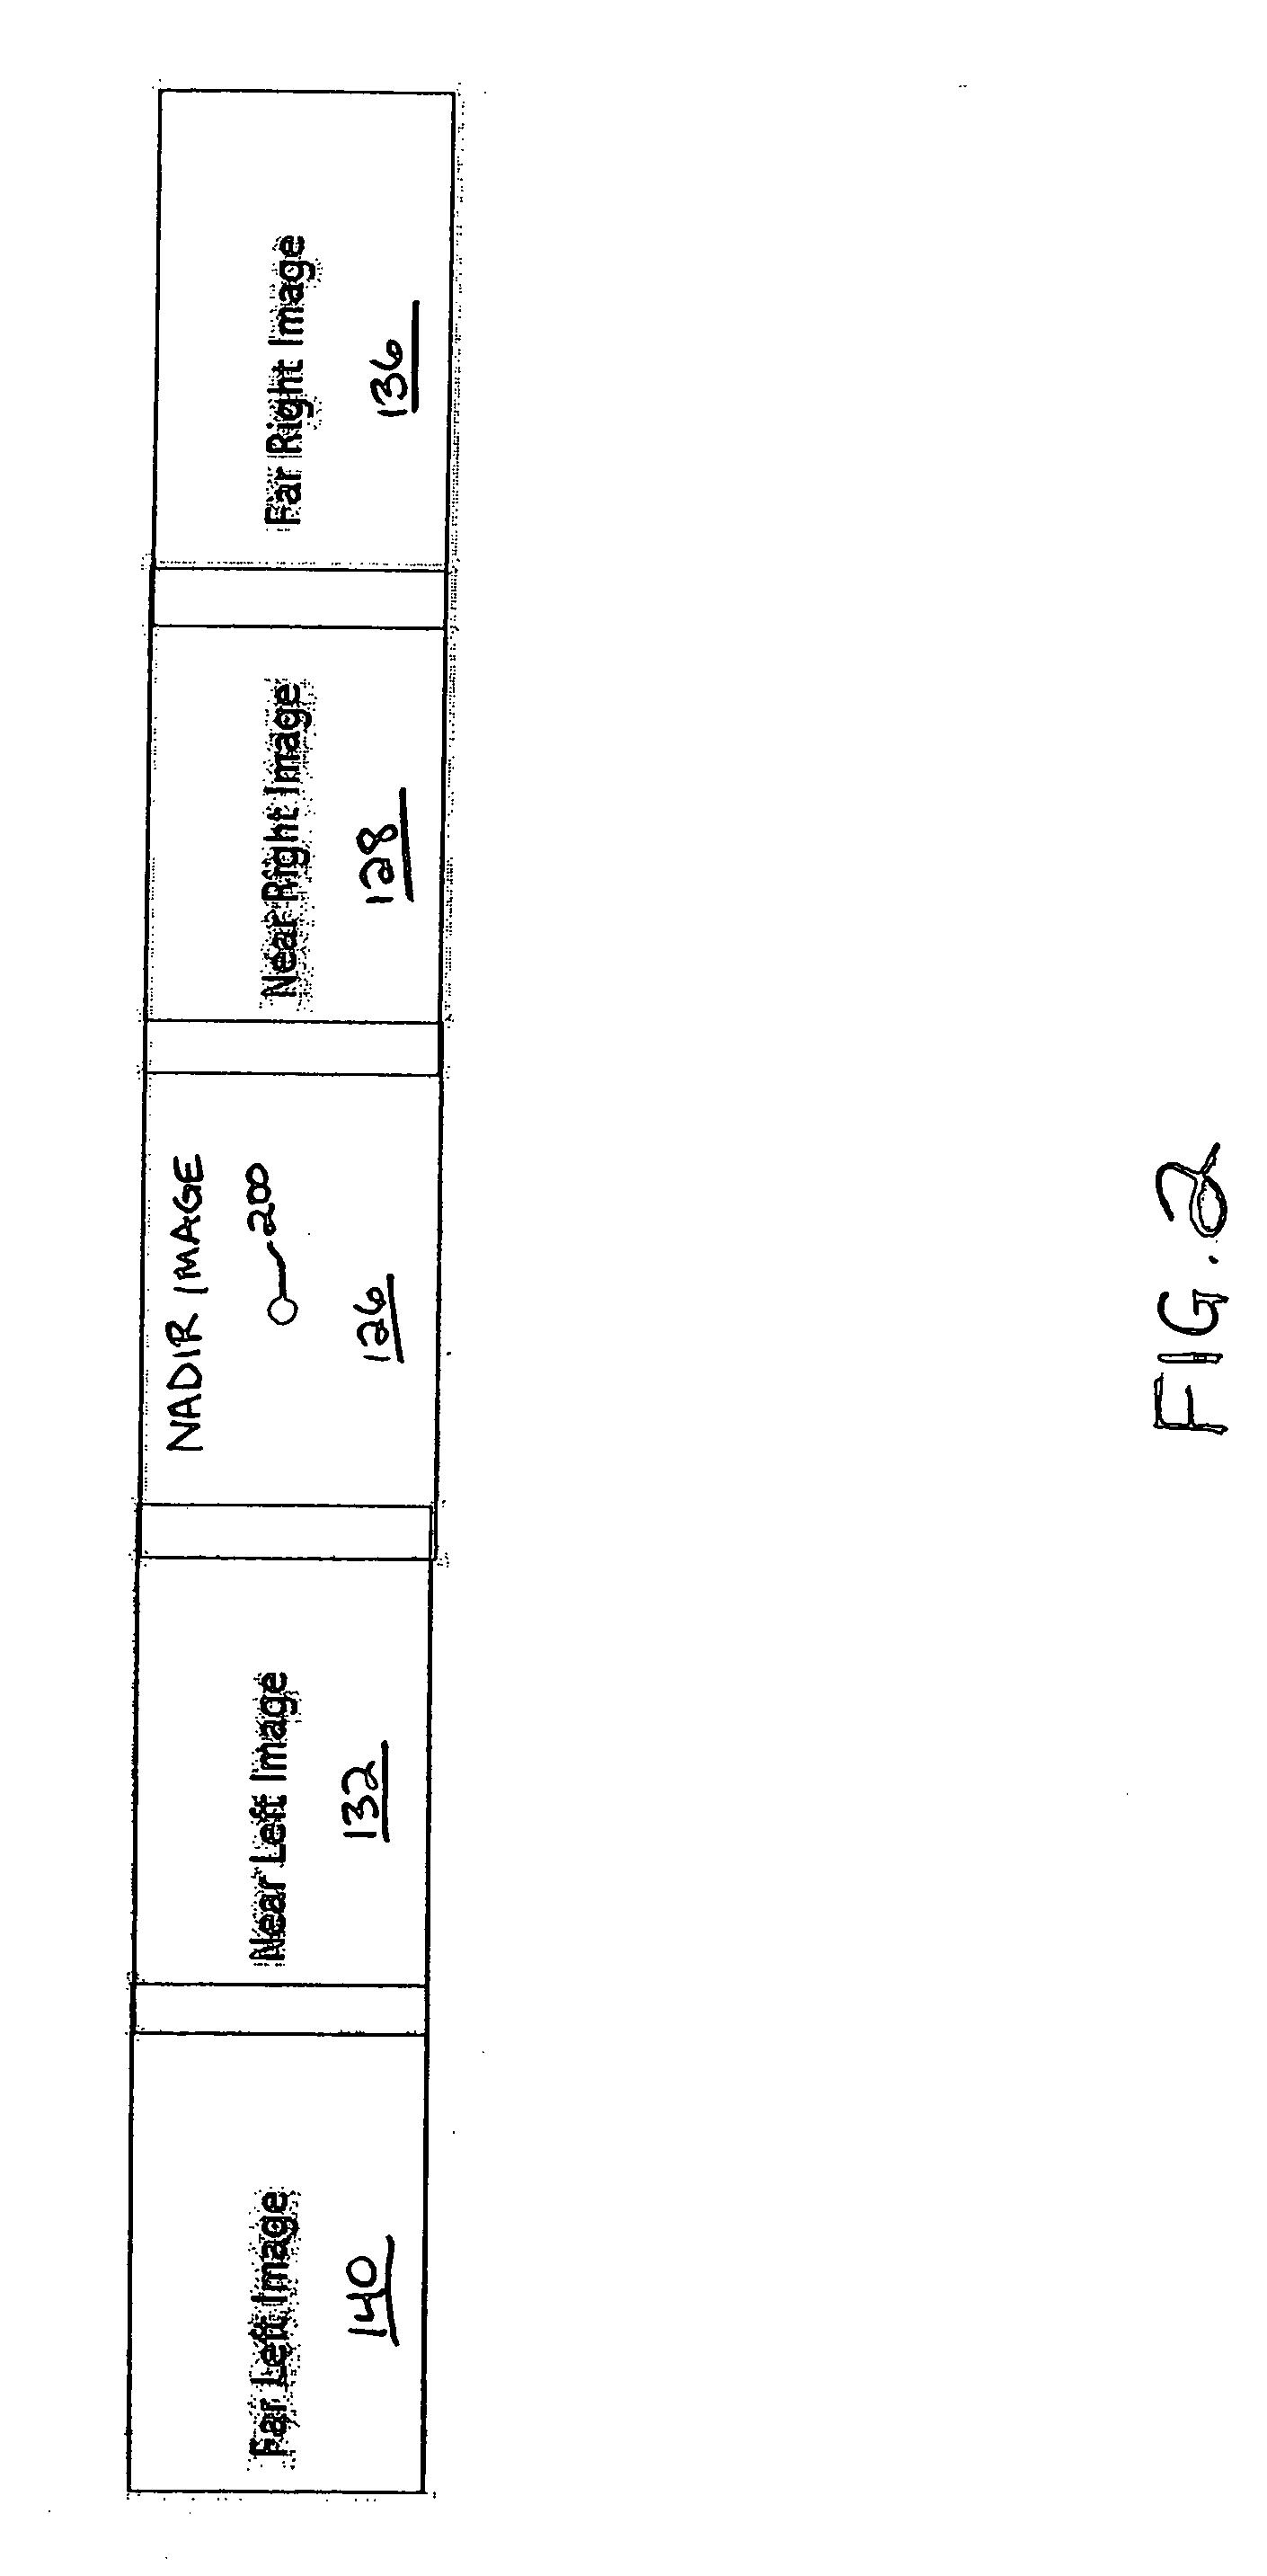 System and method for mosaicing digital ortho-images